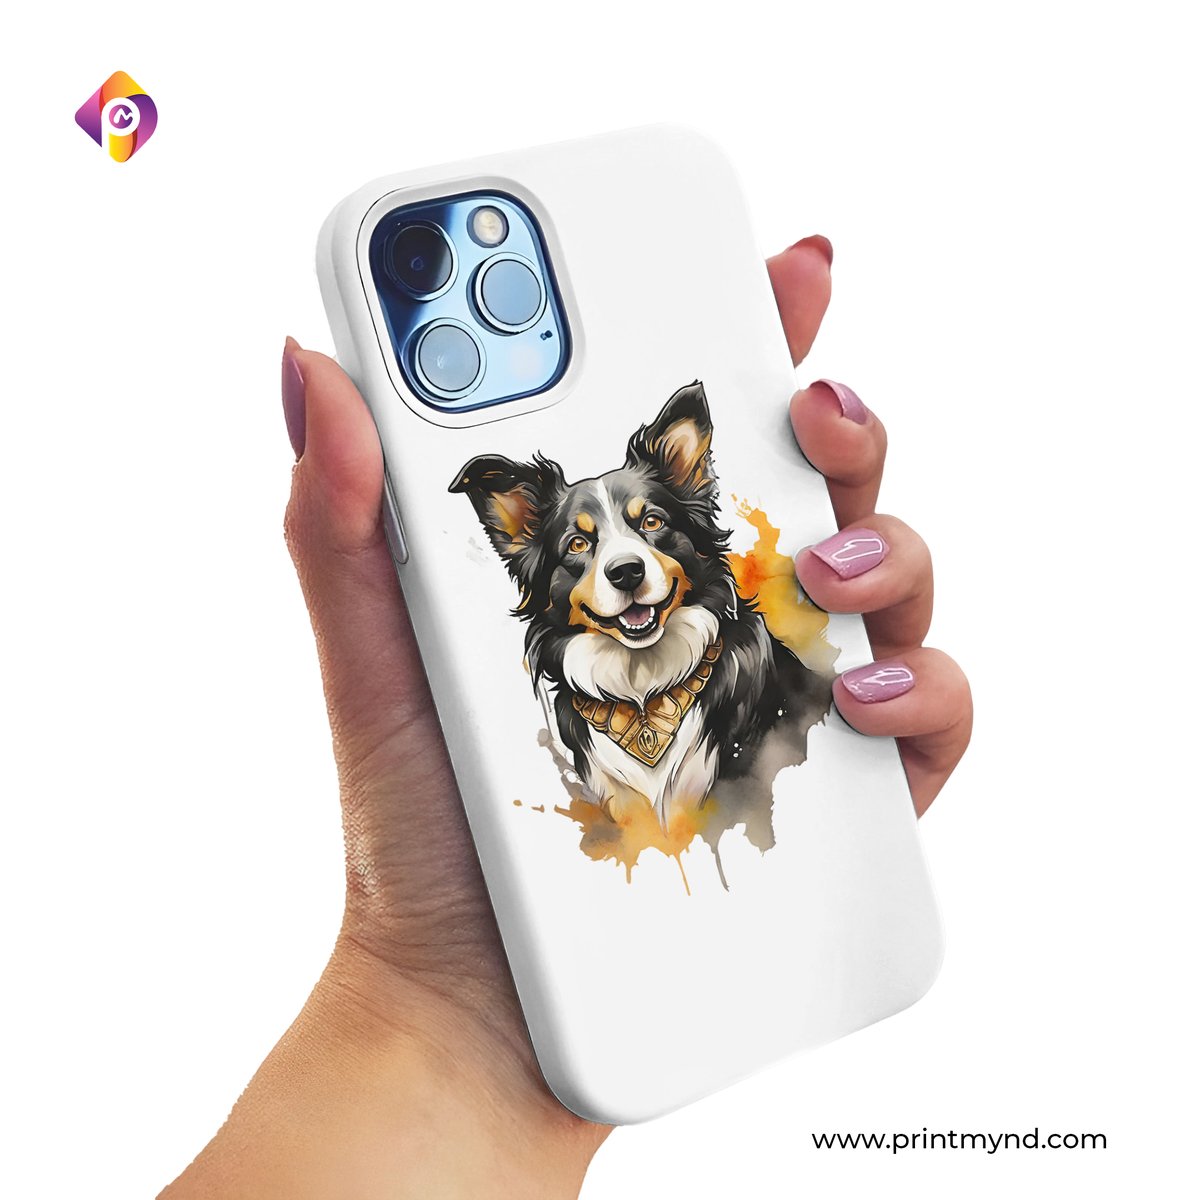 Showcase your furry friend with a personalized touch! 🐶😍

Our custom pet phone cases feature high-quality designs to keep your beloved companion close, wherever you go.

Order yours today!

#personlizedphonecase #petmobilecover #printmynd #giftshop #mobilecover